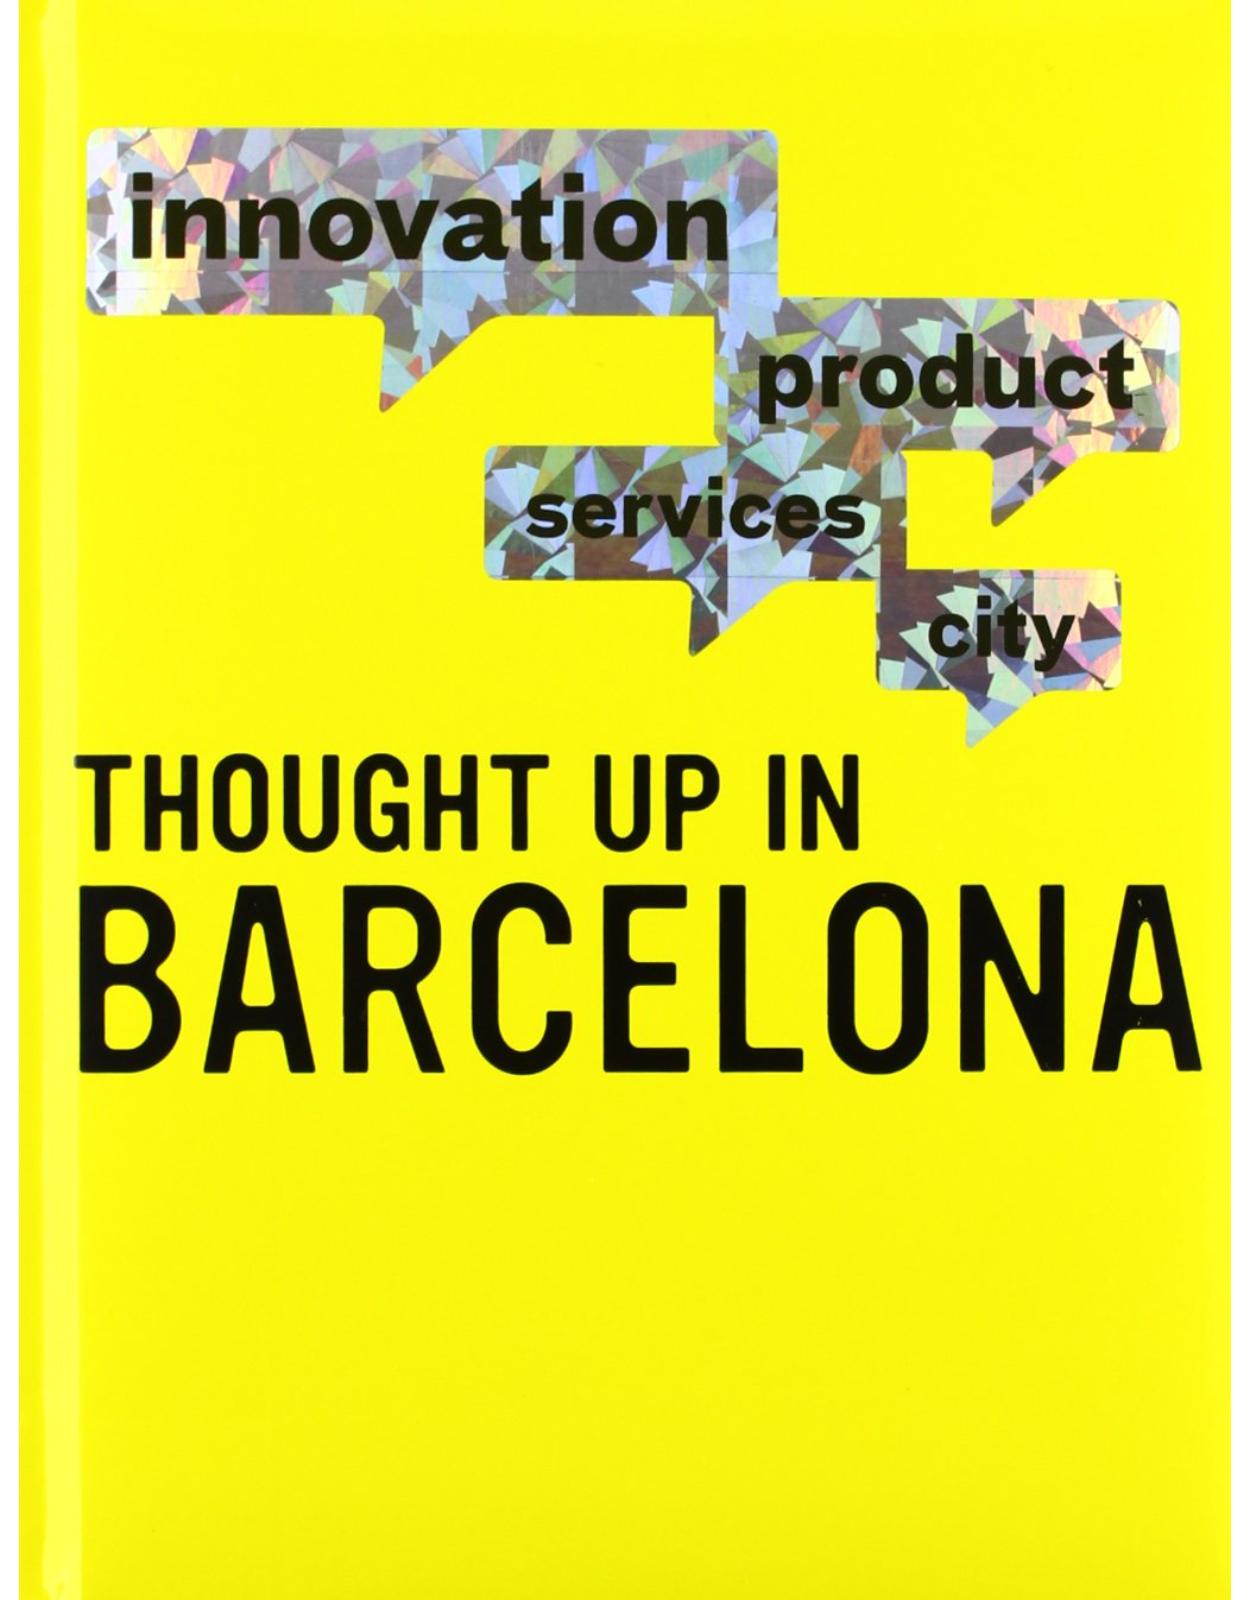 Thought Up in Barcelona